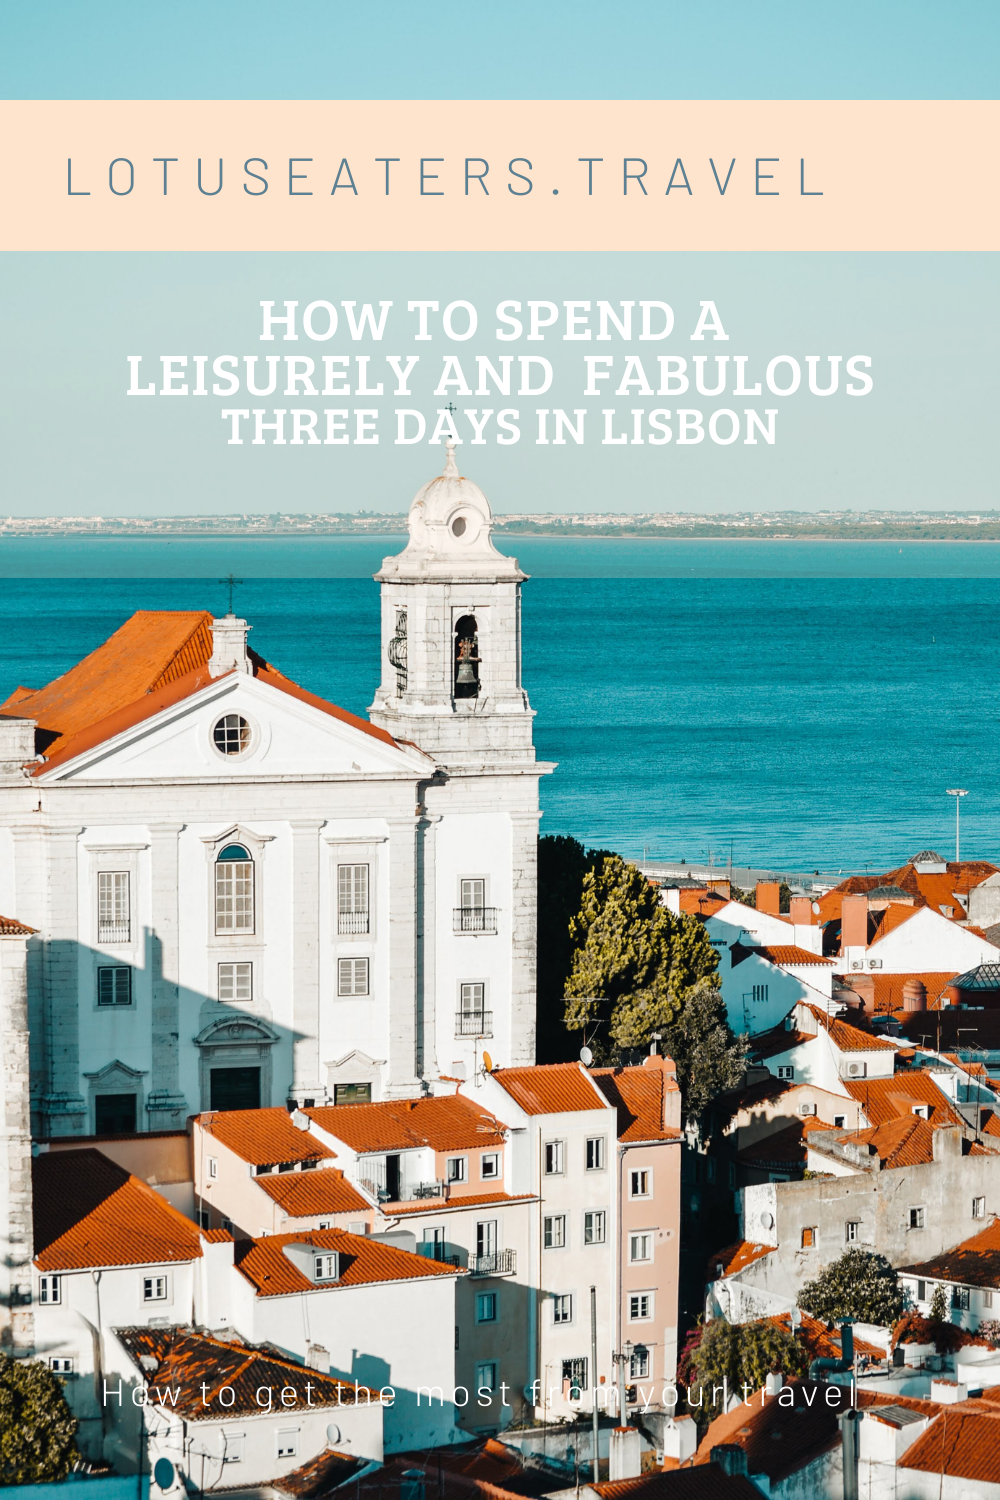 How to enjoy a leisurely and fabulous three days in Lisbon